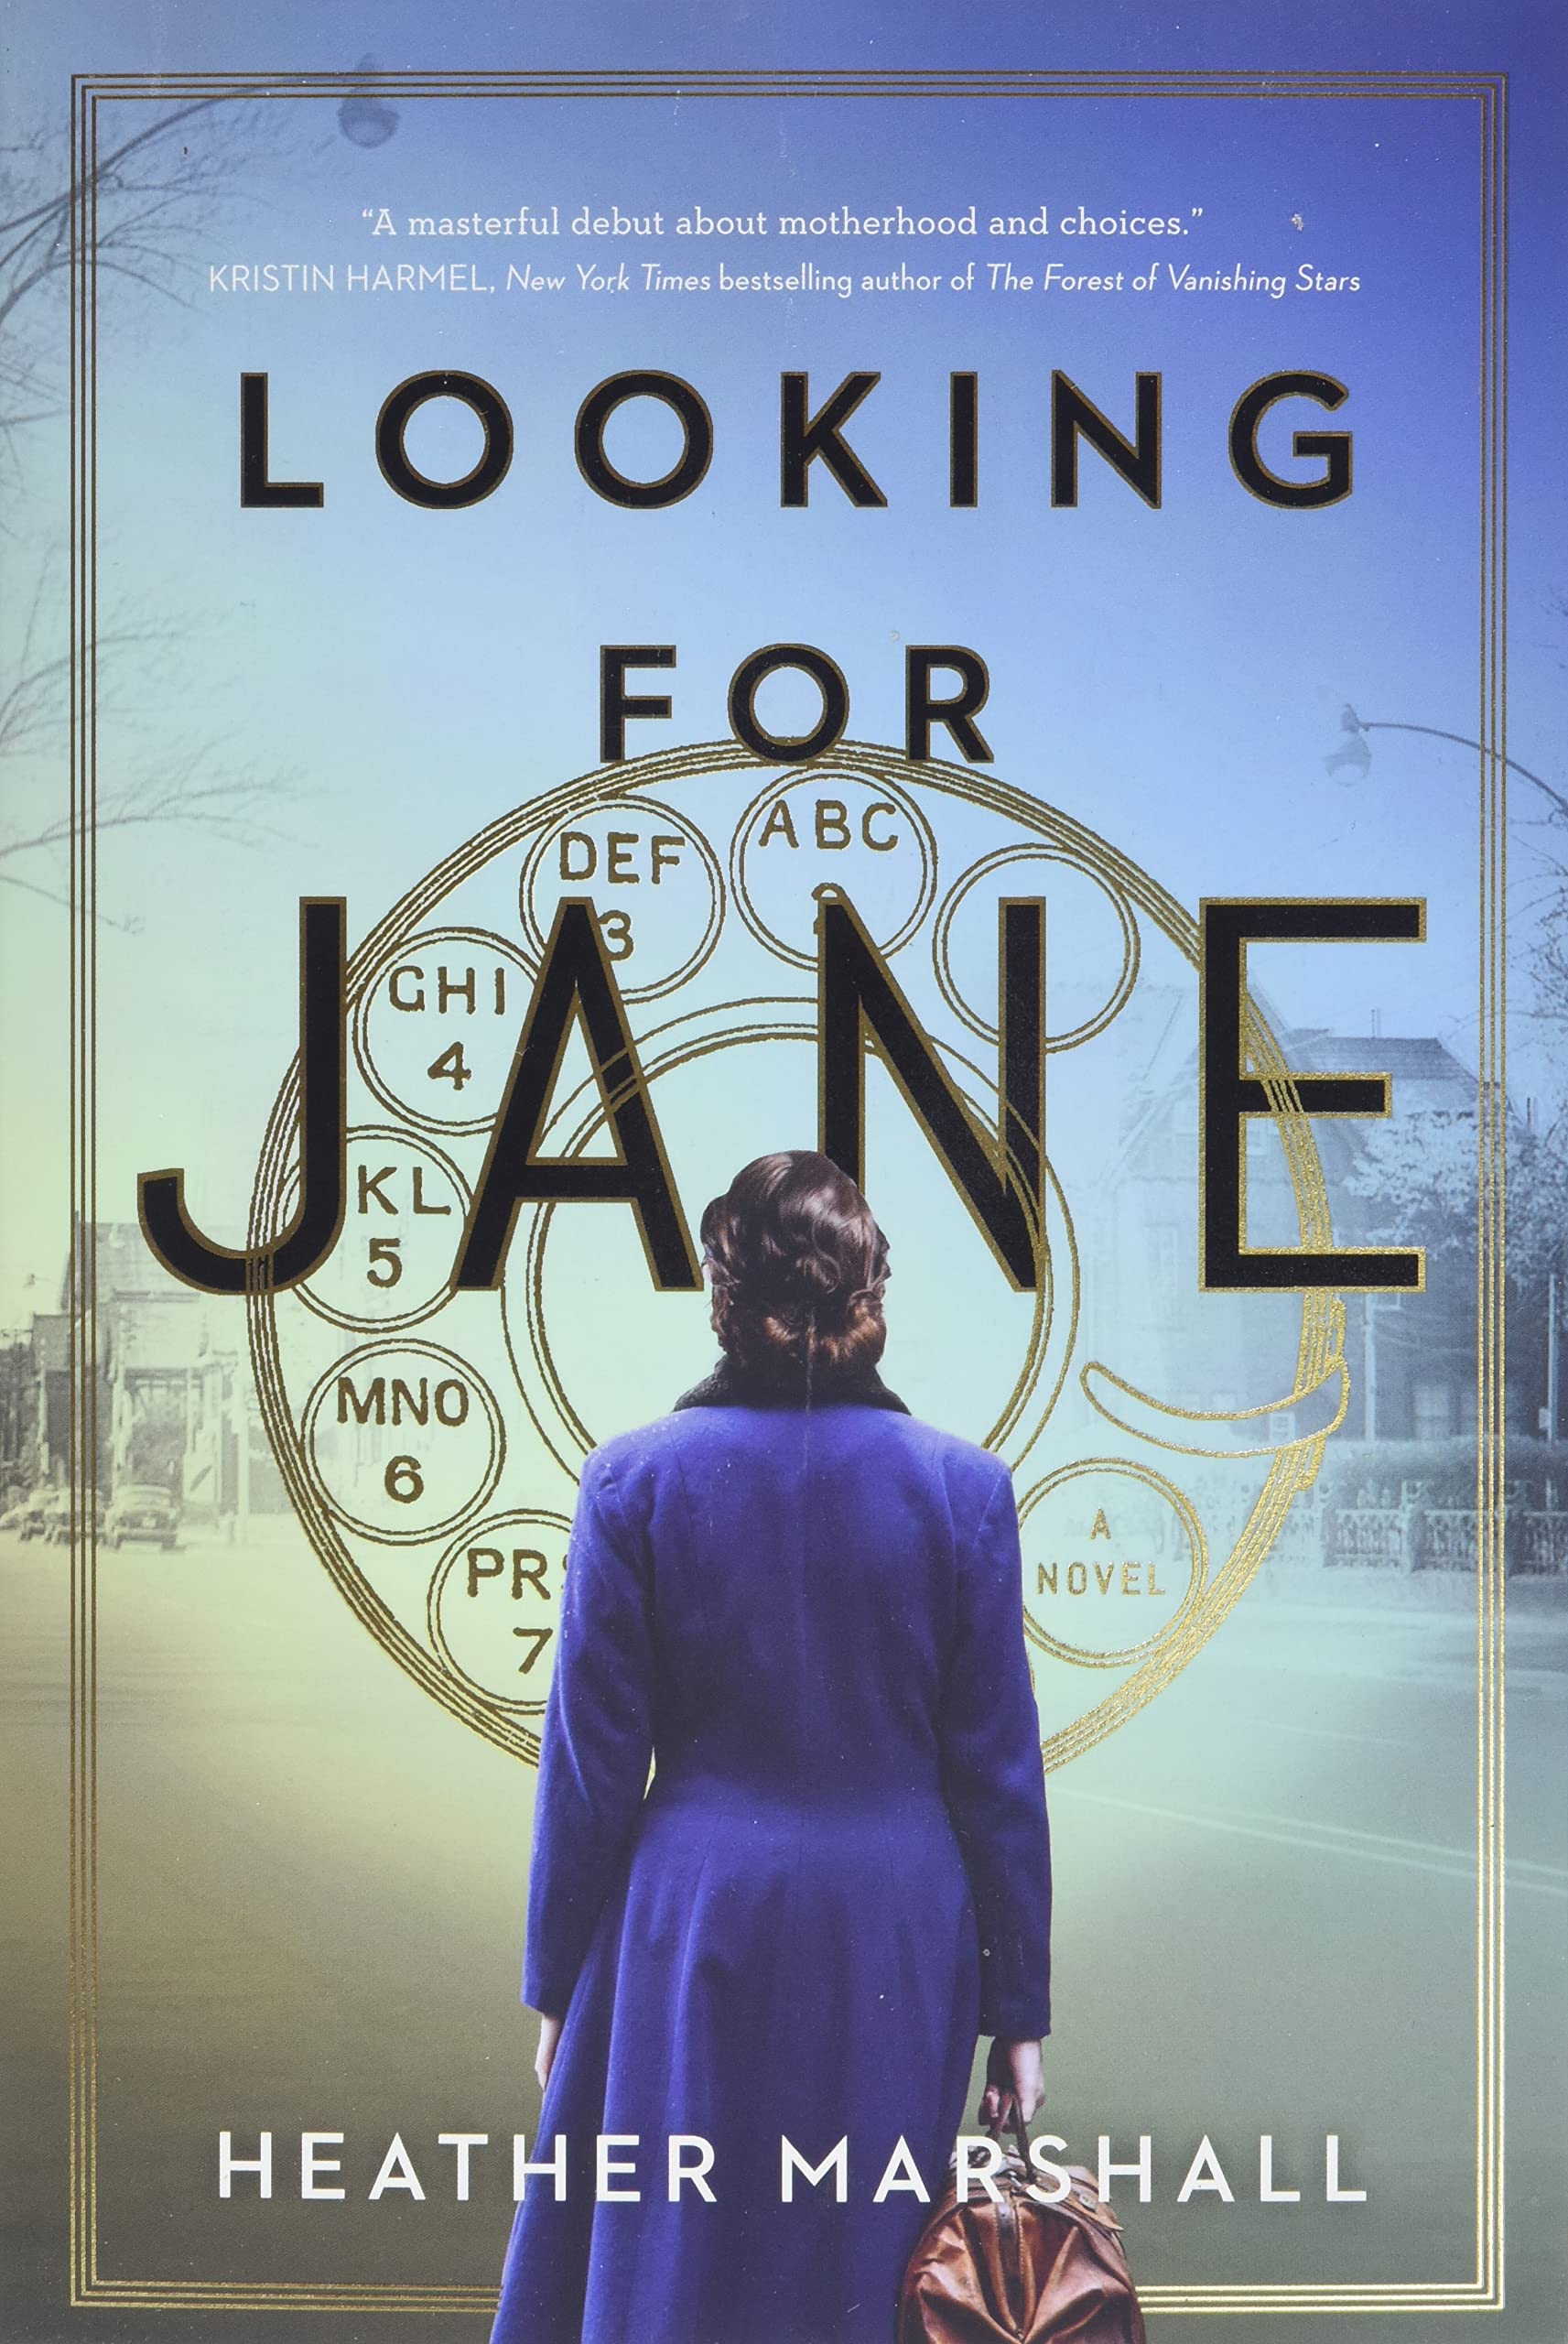 Looking for Jane